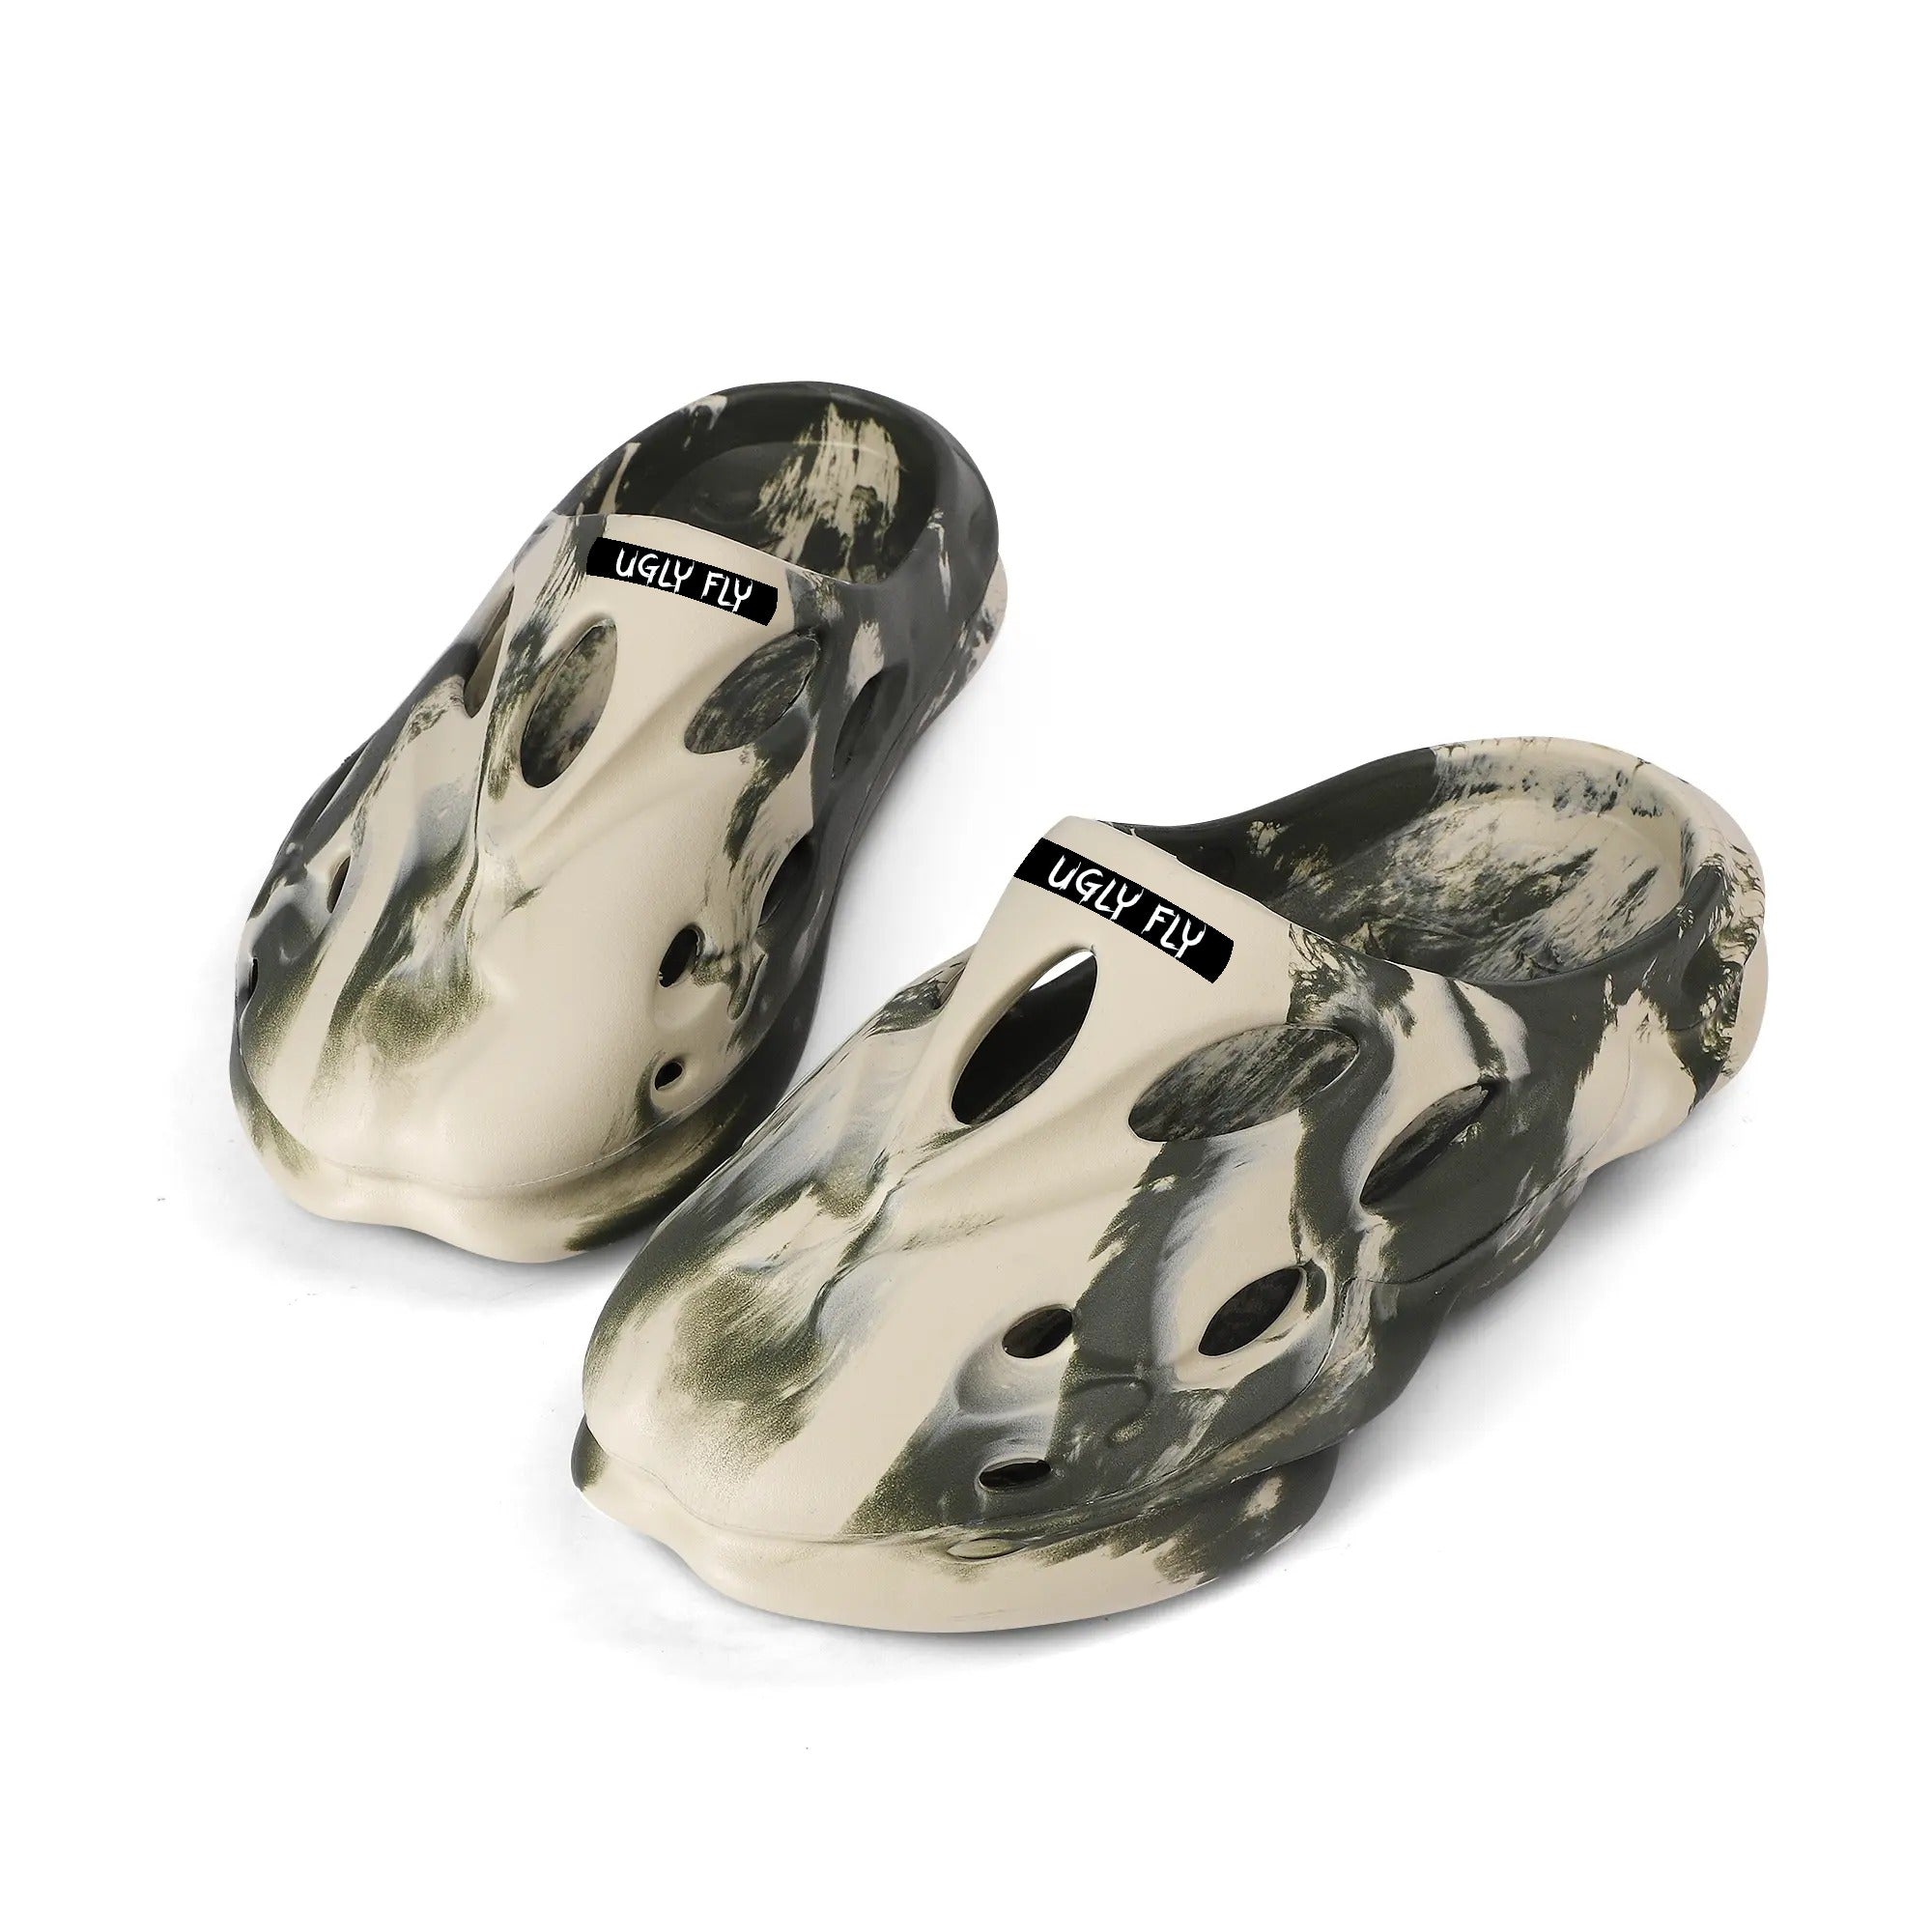 Green - Ugly Fly Leisure EVA Two-tone Hollow Out Mens Clogs Sandals - mens clogs at TFC&H Co.